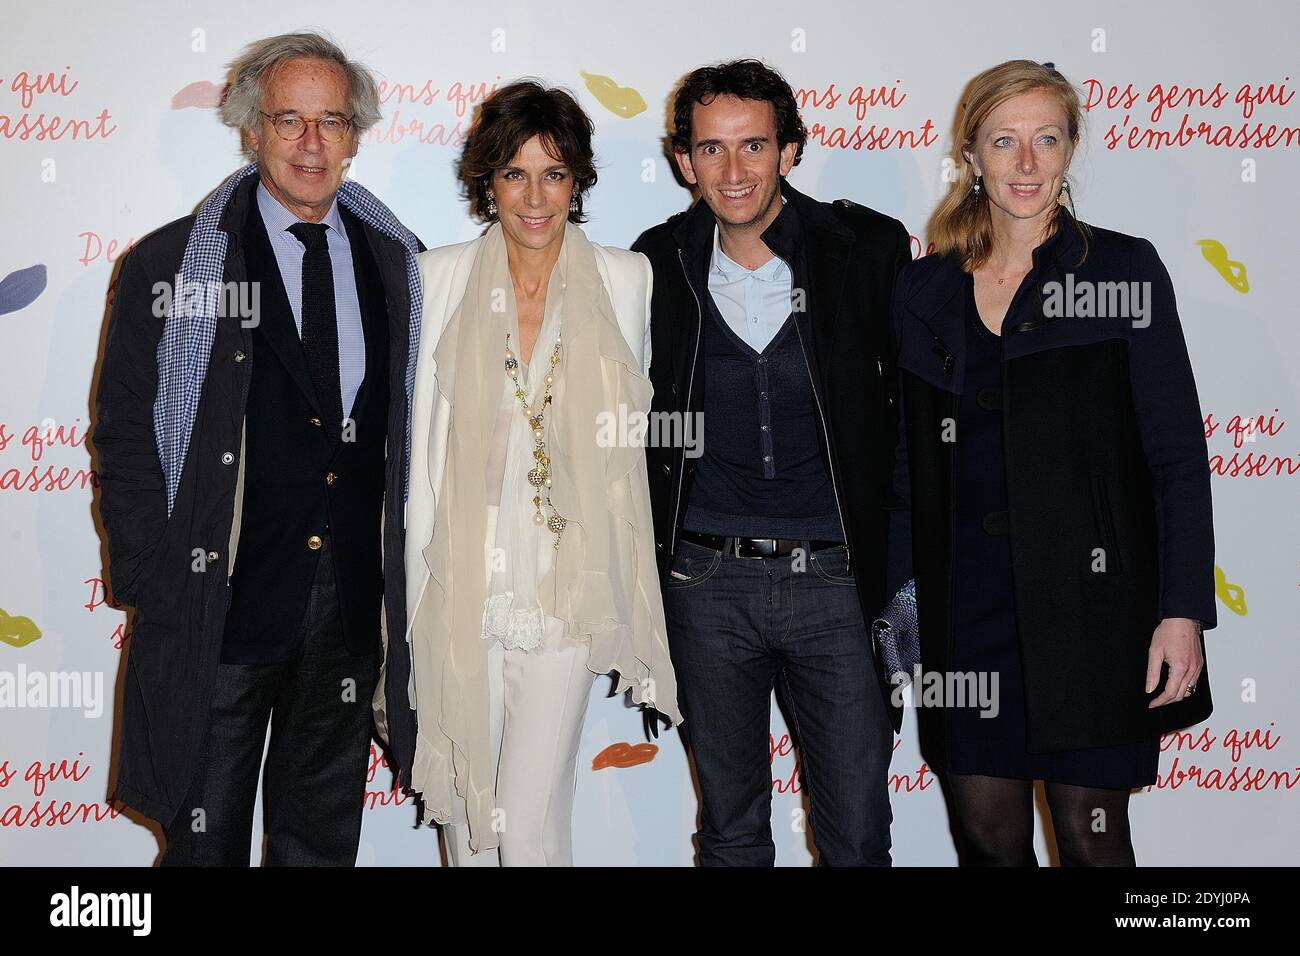 Olivier Orban and Christine Orban attending the premiere of 'Des Gens qui S'Embrassent' held at Gaumont Marignan in Paris, France on April 1, 2013. Photo by Nicolas Briquet/ABACAPRESS.COM Stock Photo